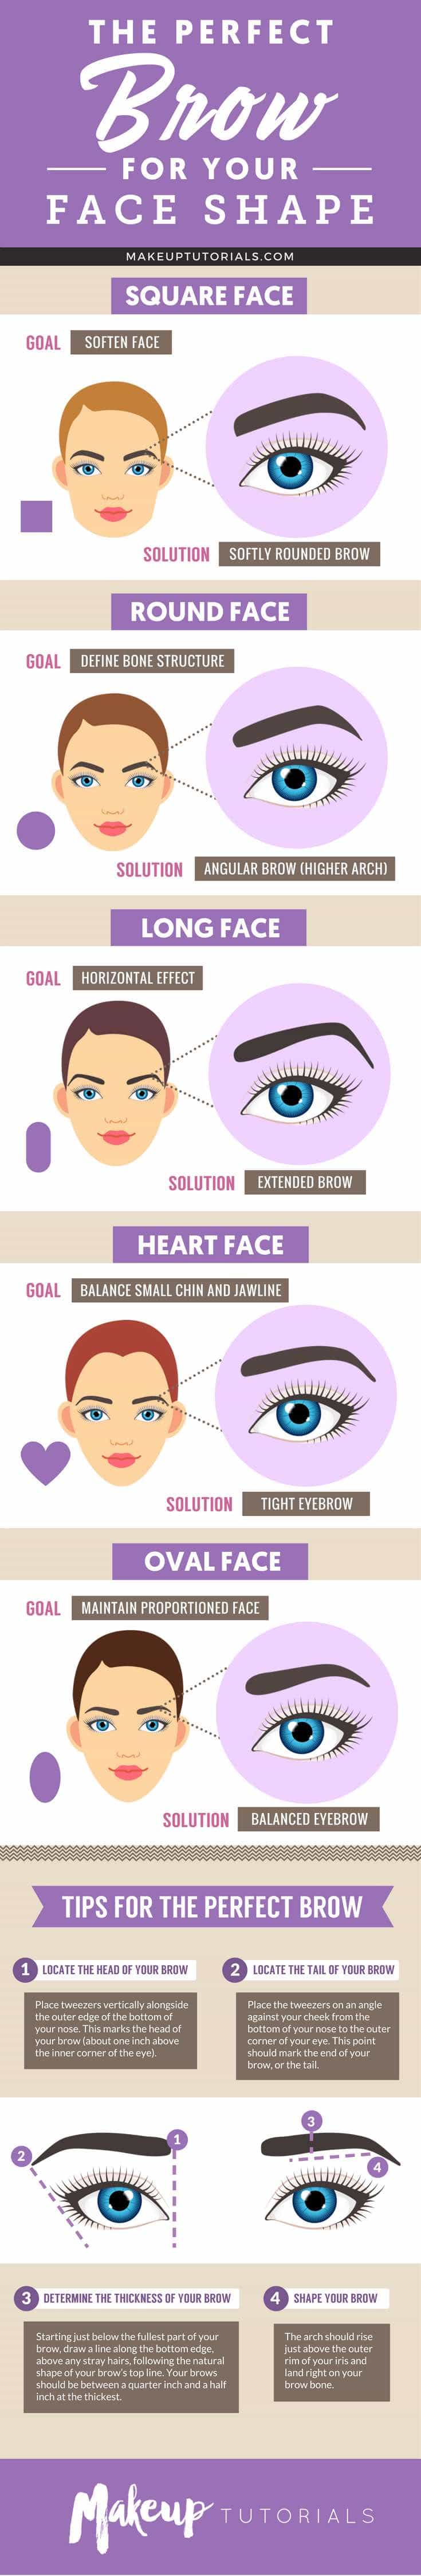 Infographic | Eyebrow Tutorial | Finding The Right Brow Shape For Your Face